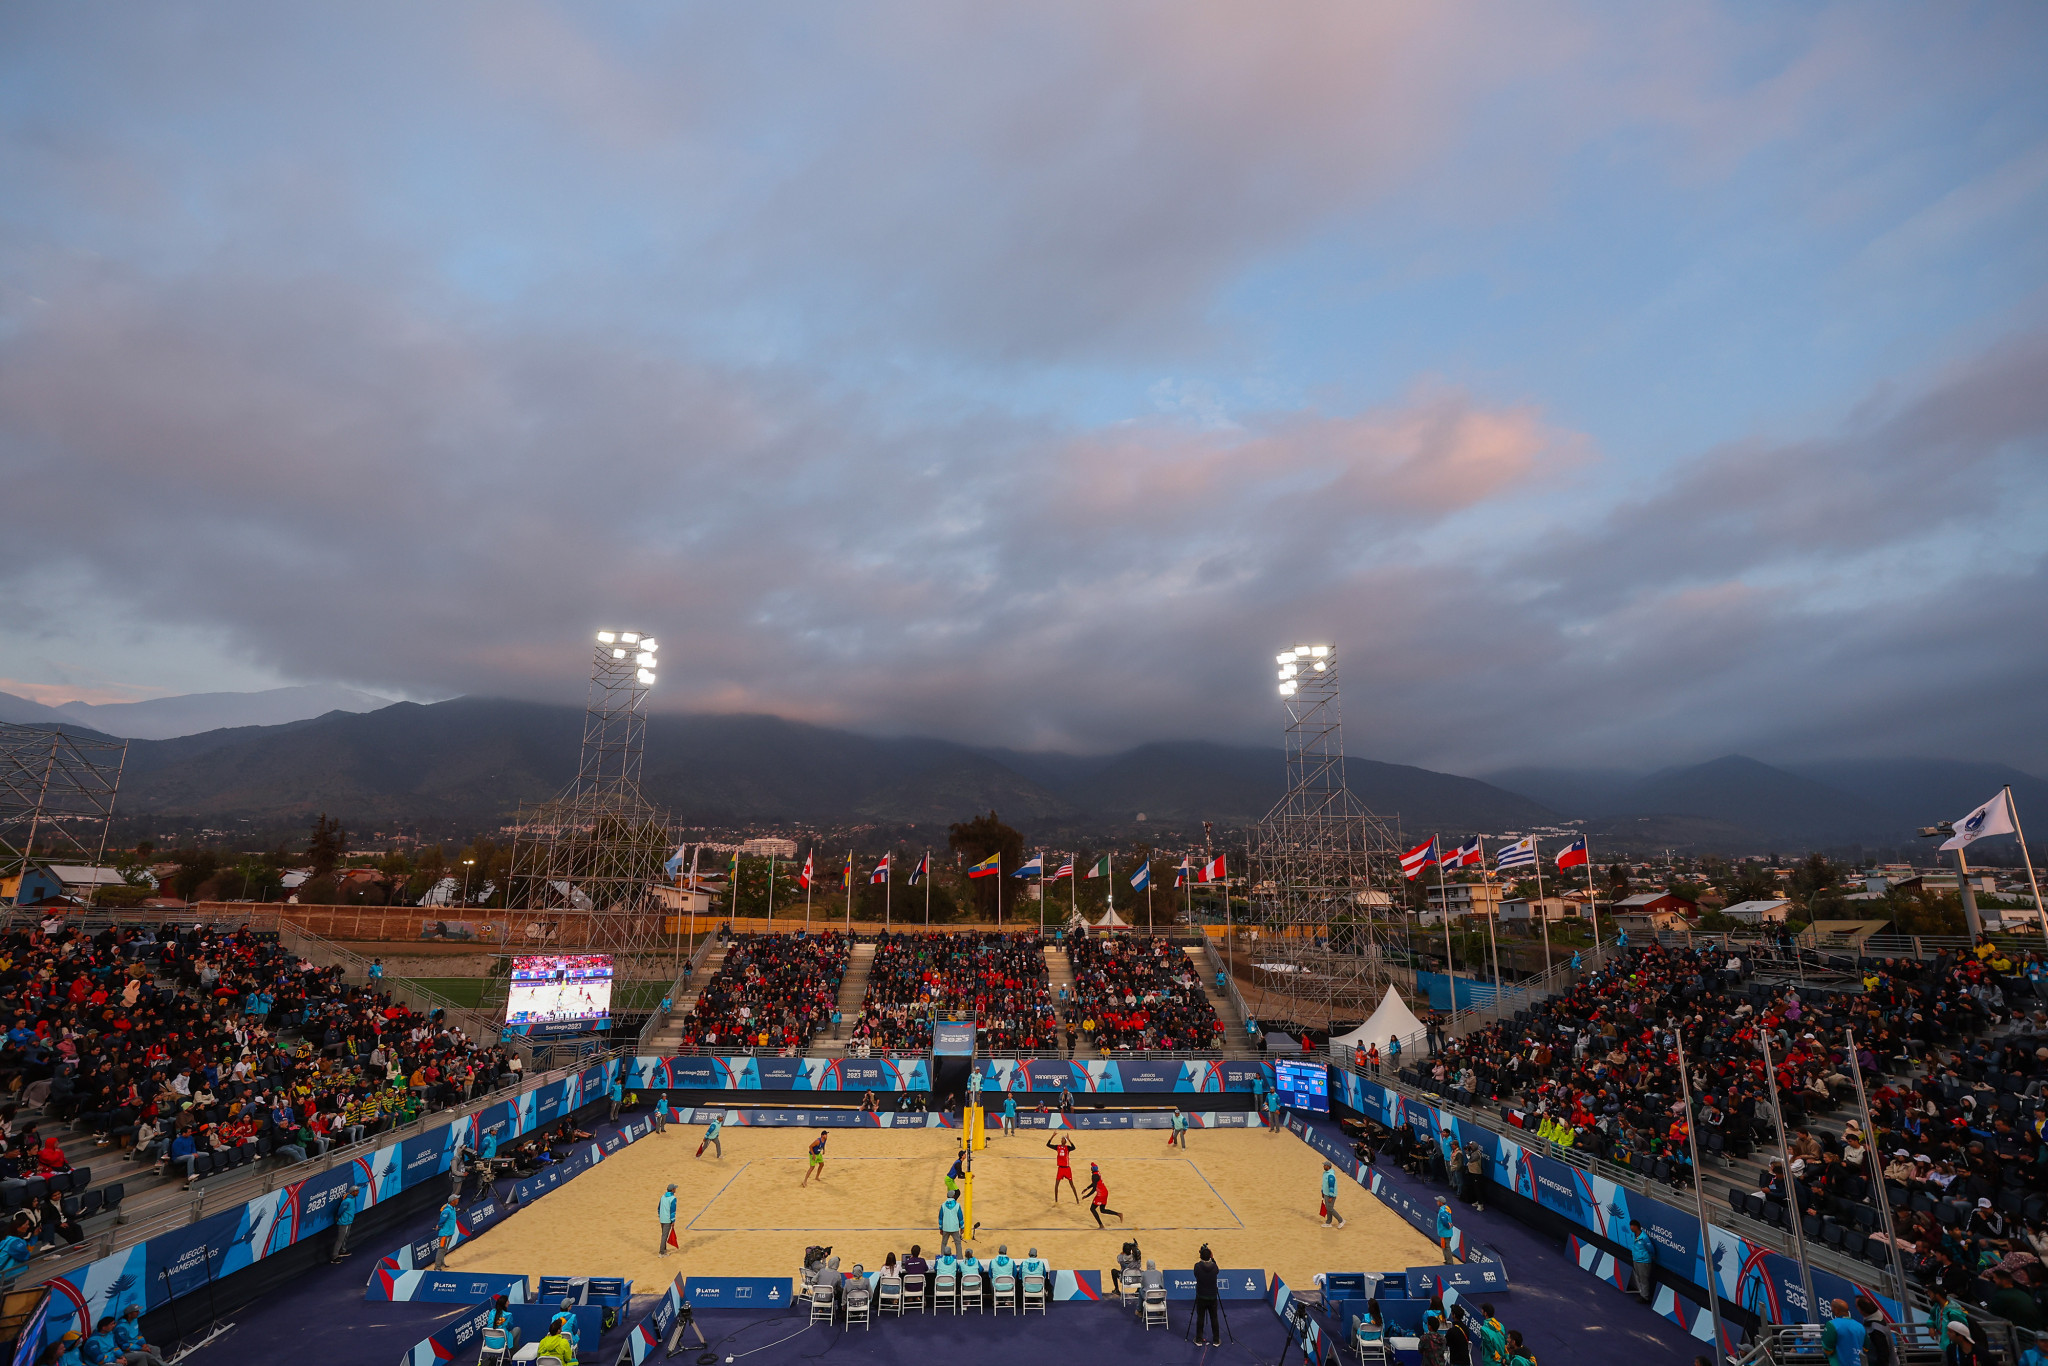 The medal games in beach volleyball attracted a big crowd in Chile ©Getty Images